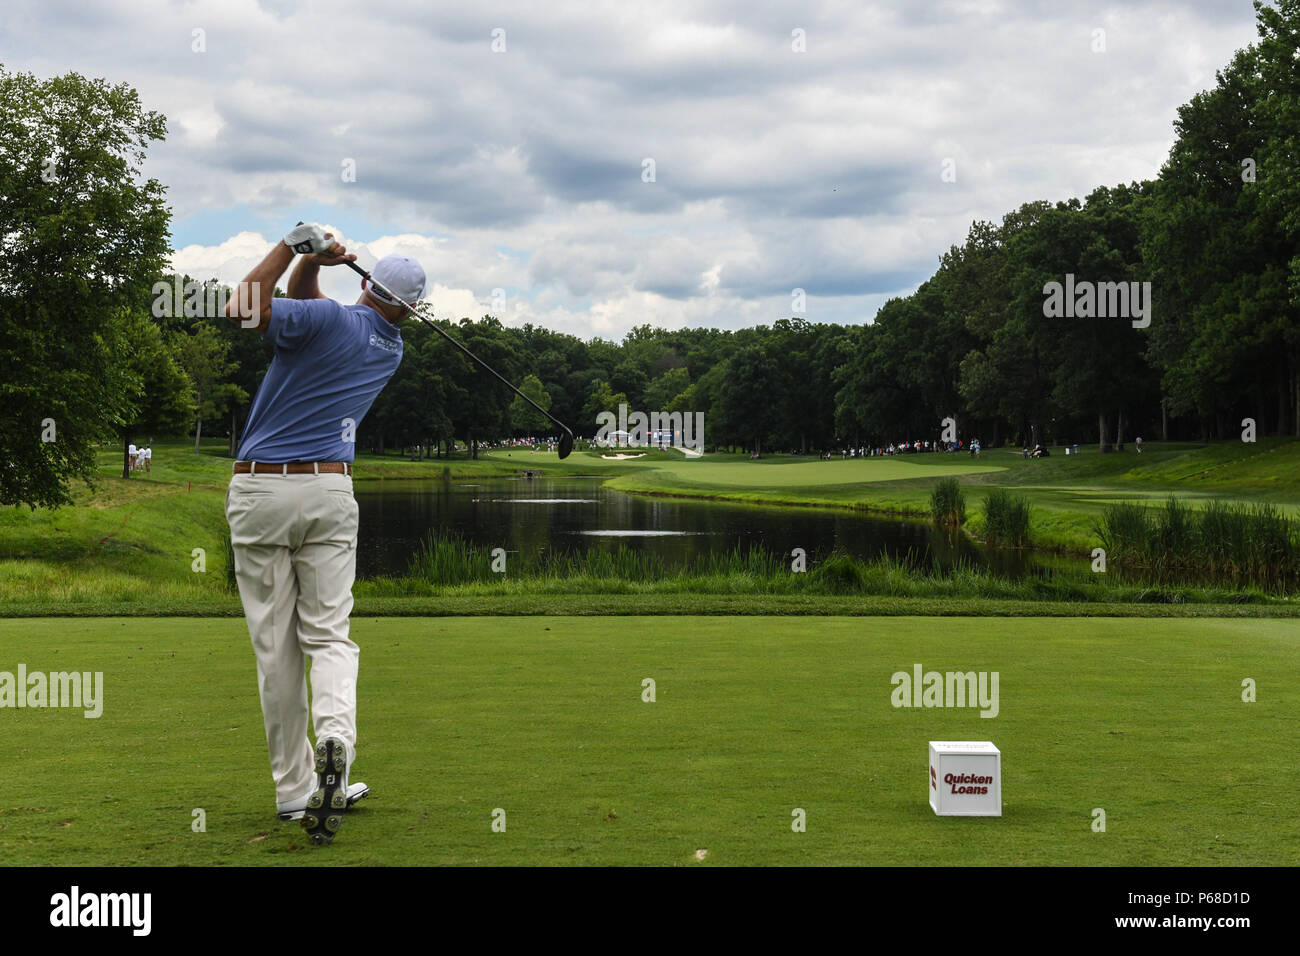 Potomac MD, USA. 28th June, 2018. Bill Haas (USA) tees off at the fourth hole during the opening round at the 2018 Quicken Loans National at the Tournament Players Club in Potomac MD. Credit: Cal Sport Media/Alamy Live News Stock Photo